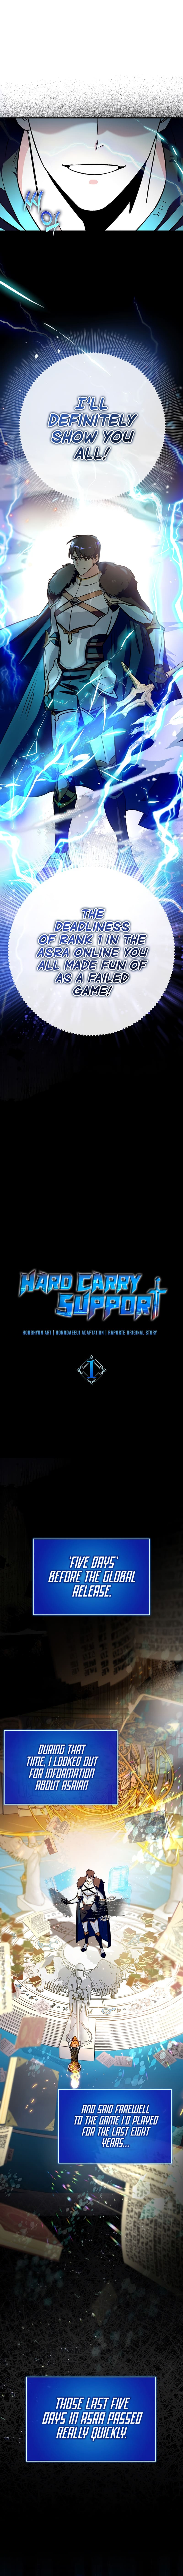 Hard Carry Support chapter 1